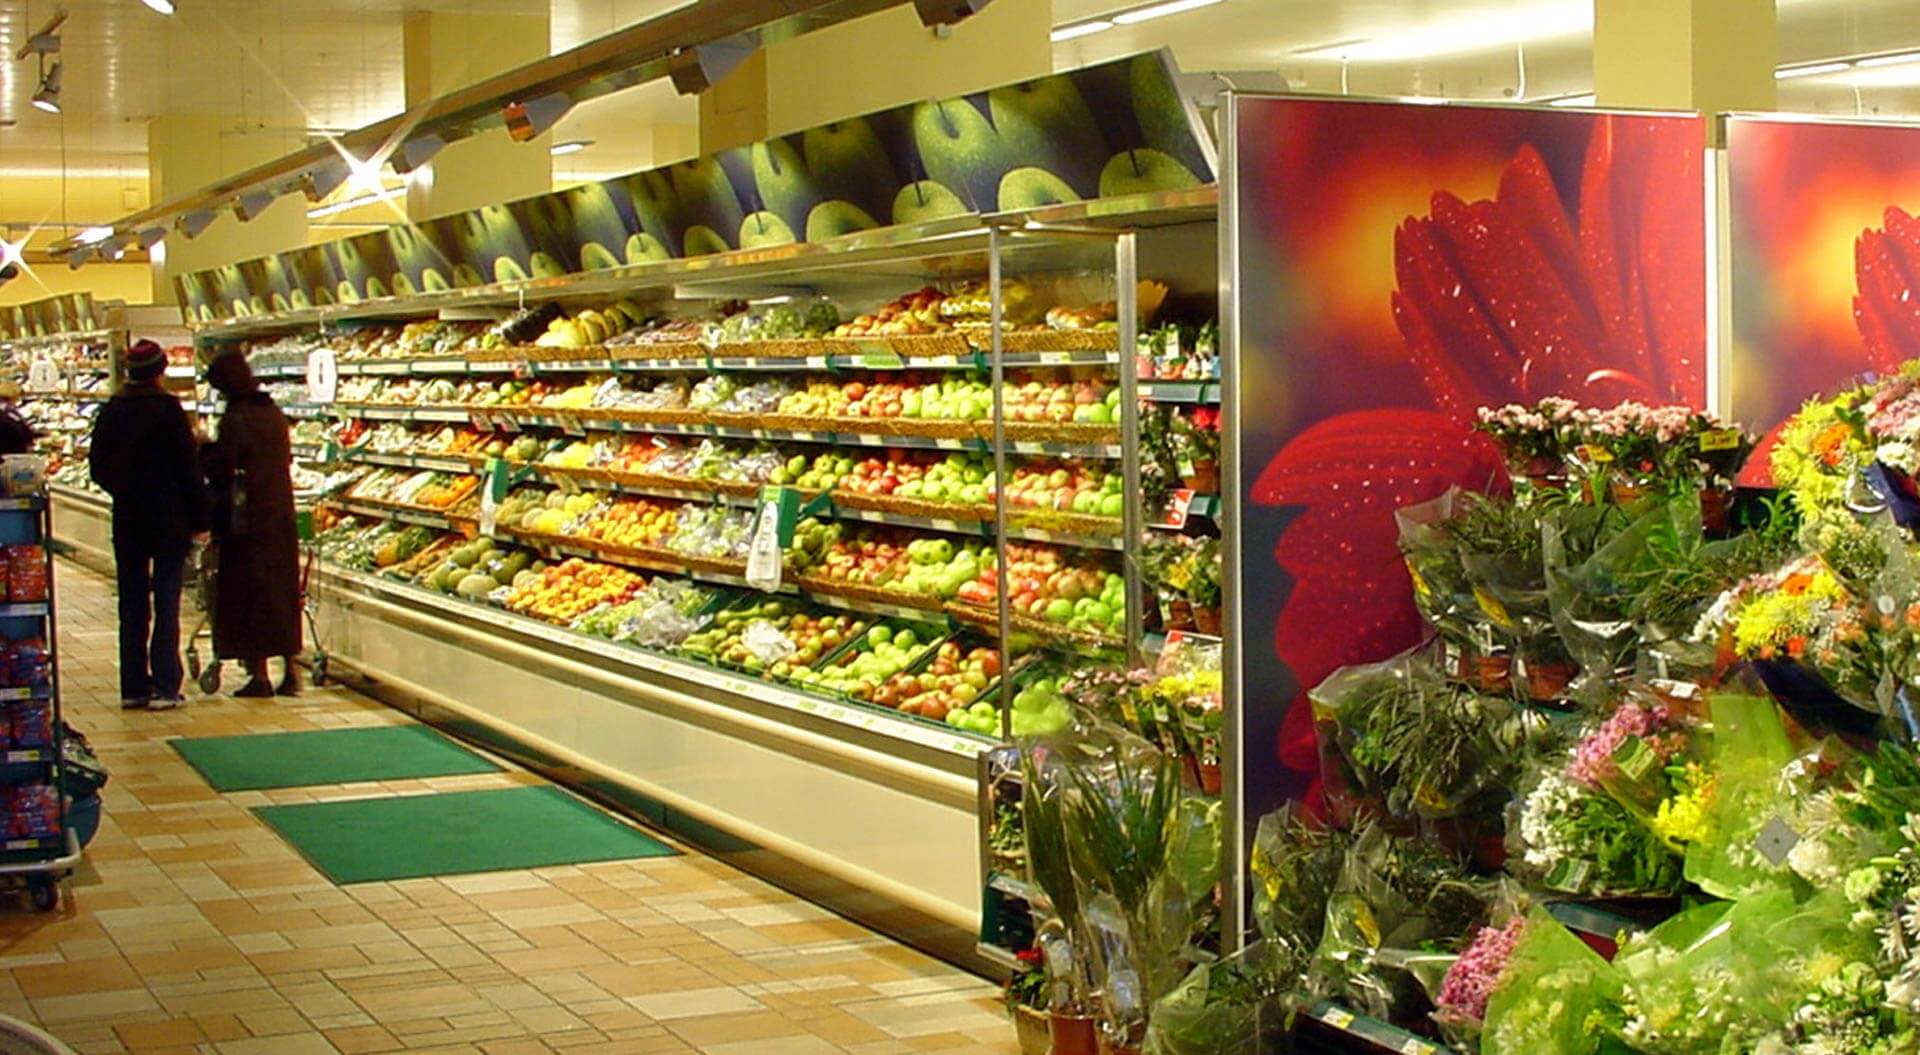 Safeway chilled fresh fproduce merchandising display and branding in supermarkets